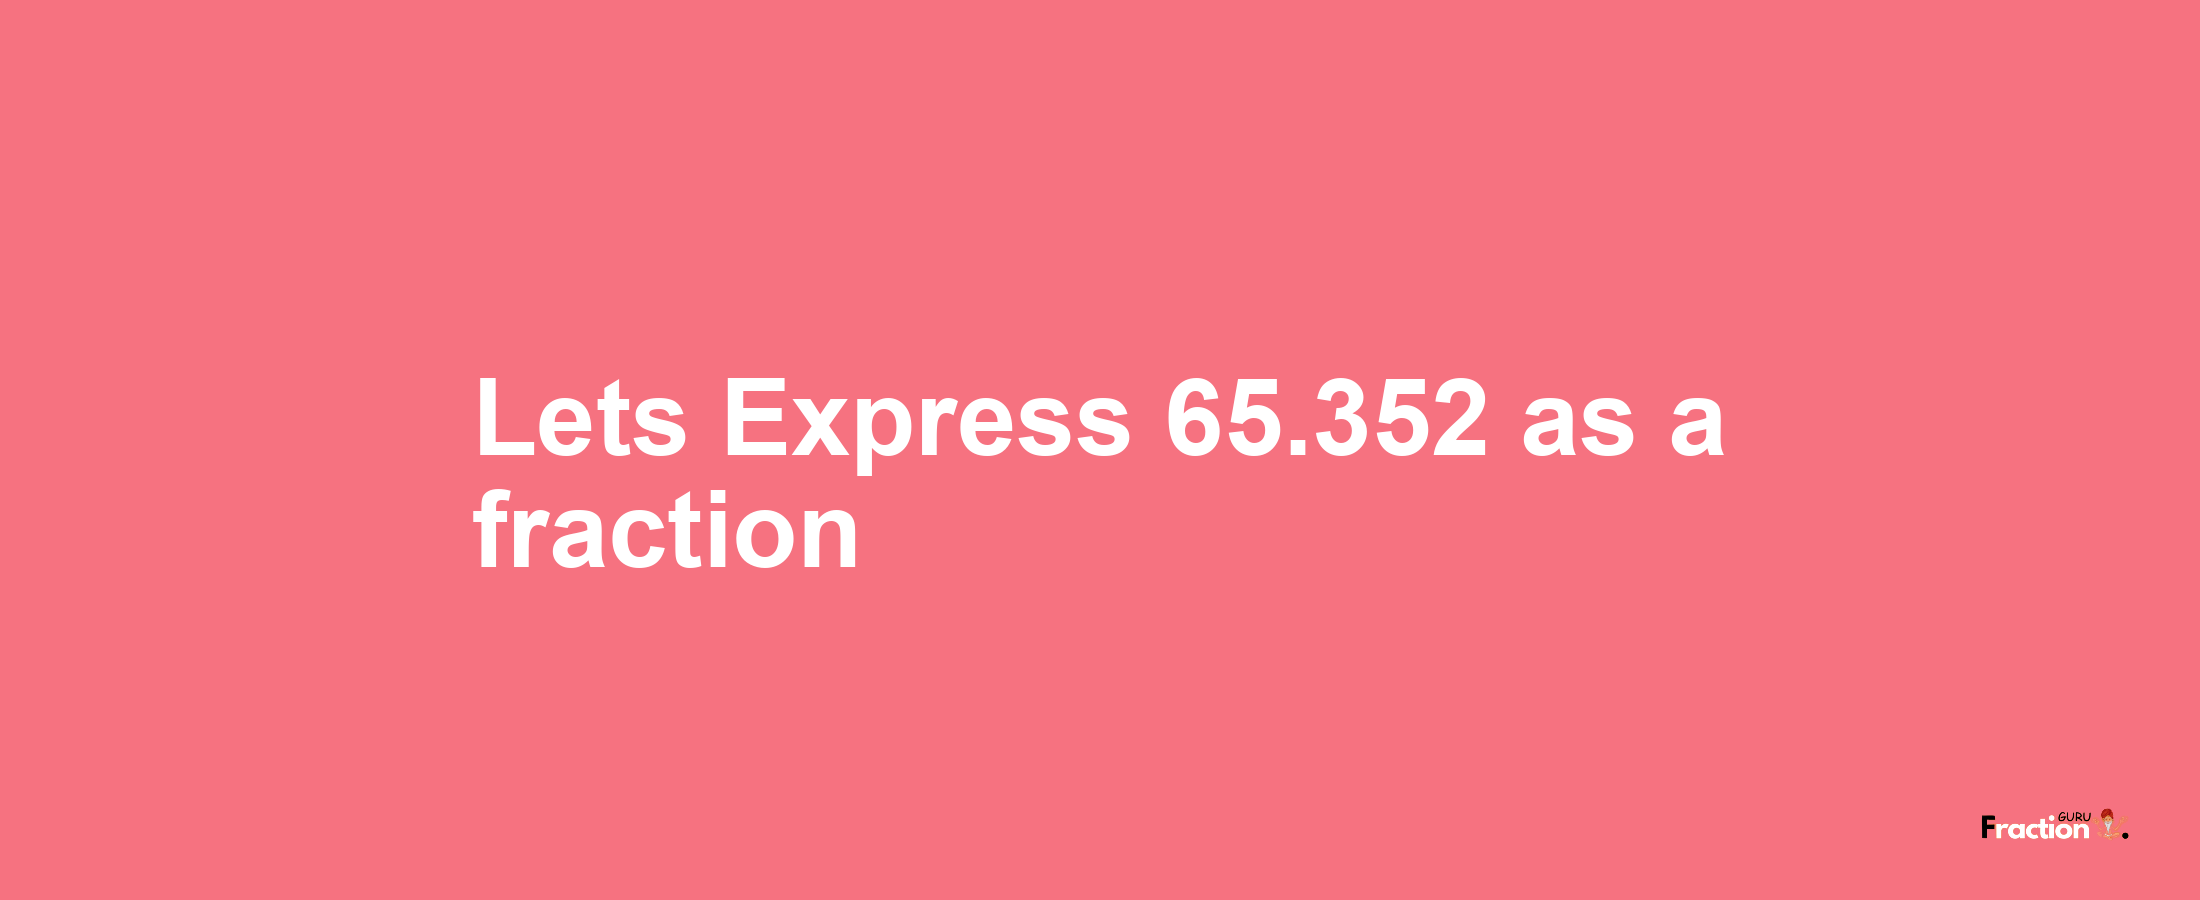 Lets Express 65.352 as afraction